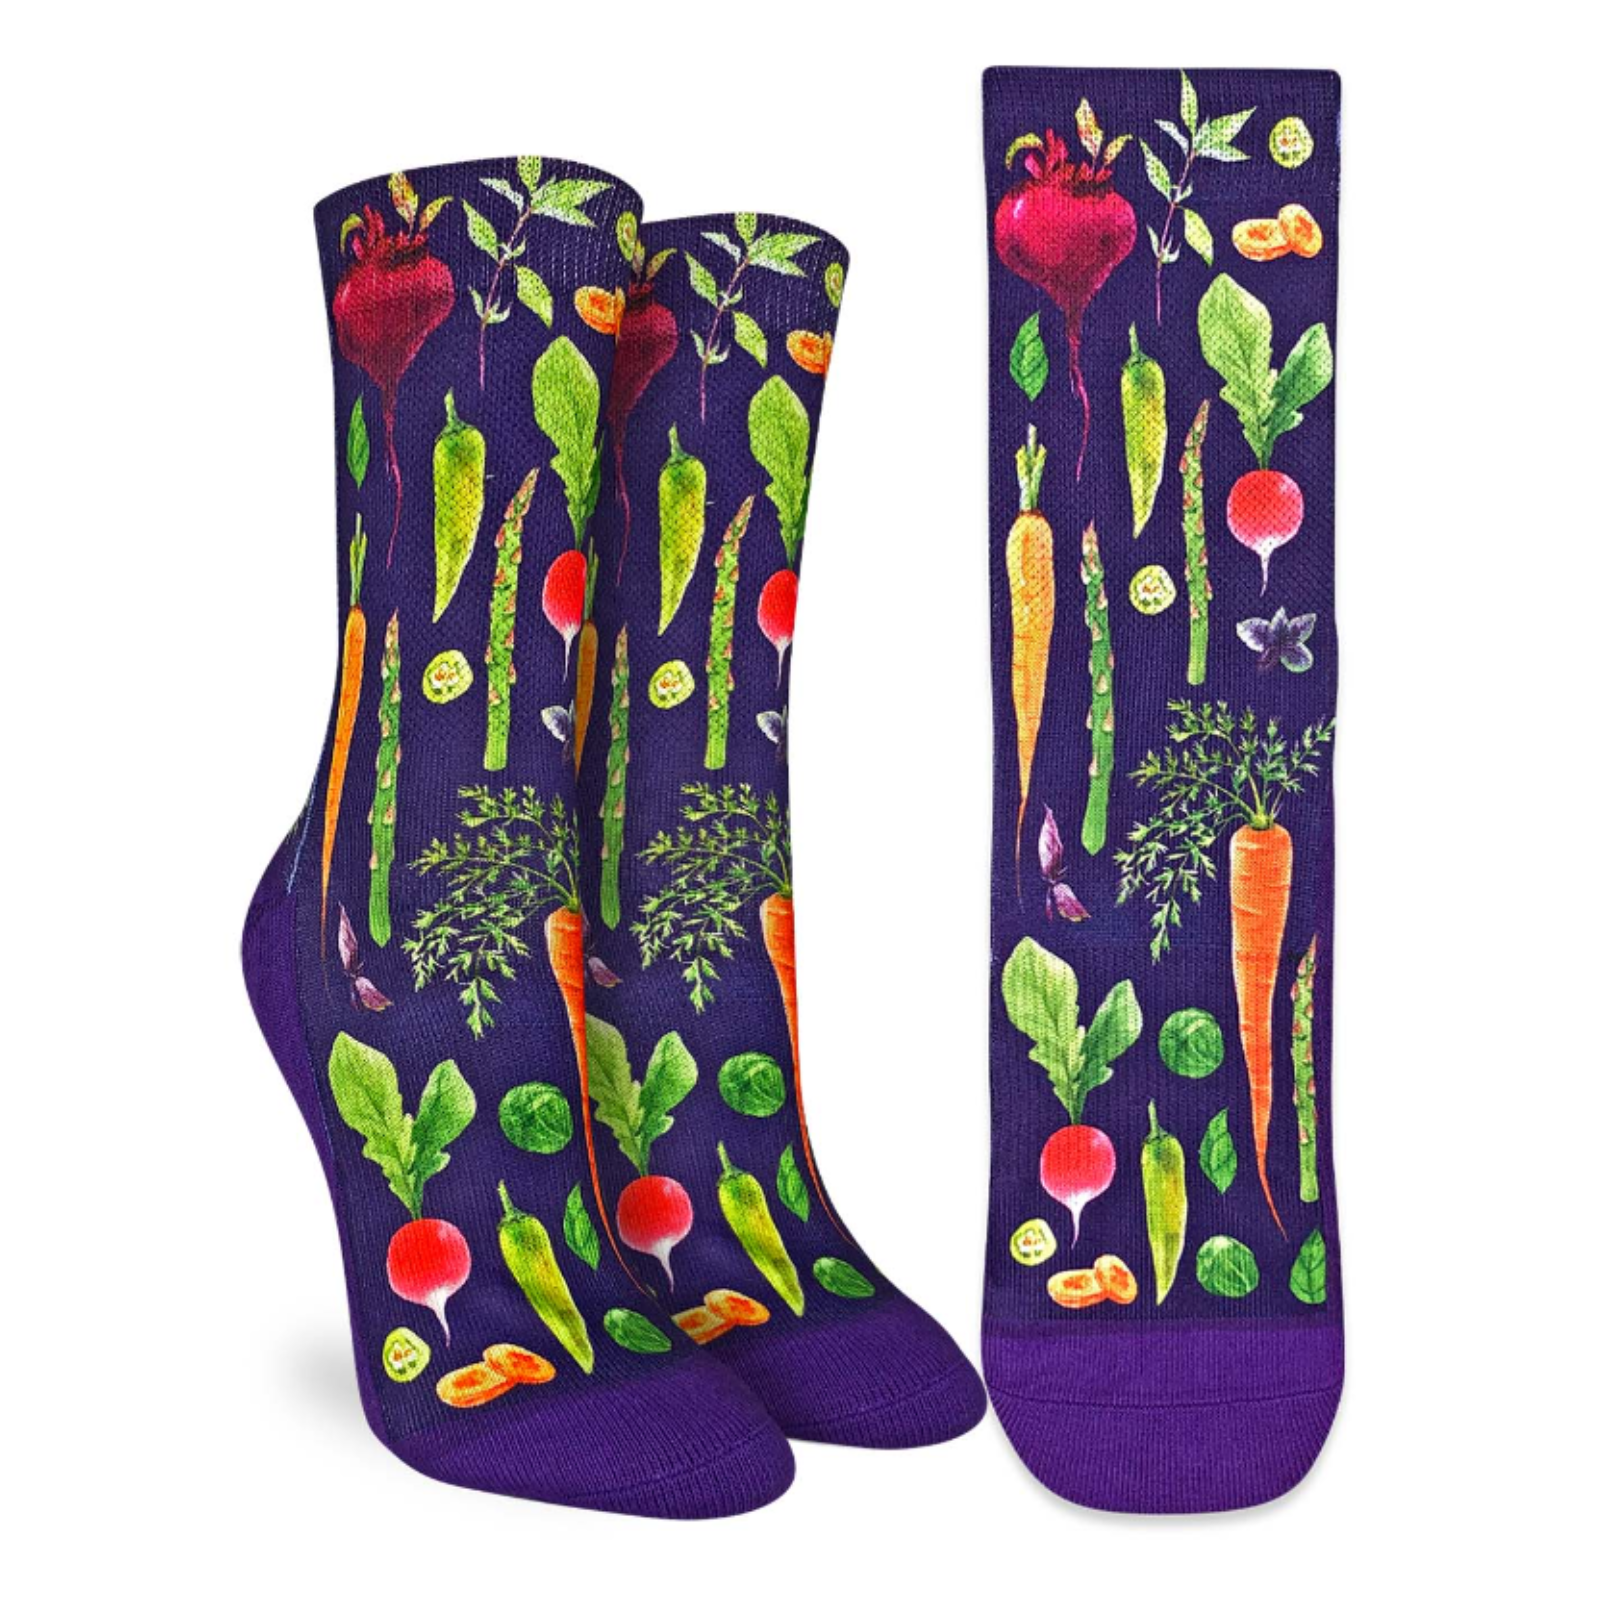 Good Luck Sock Veggies women's sock featuring purple crew sock with beets, asparagus, carrots, radishes and more on display feet